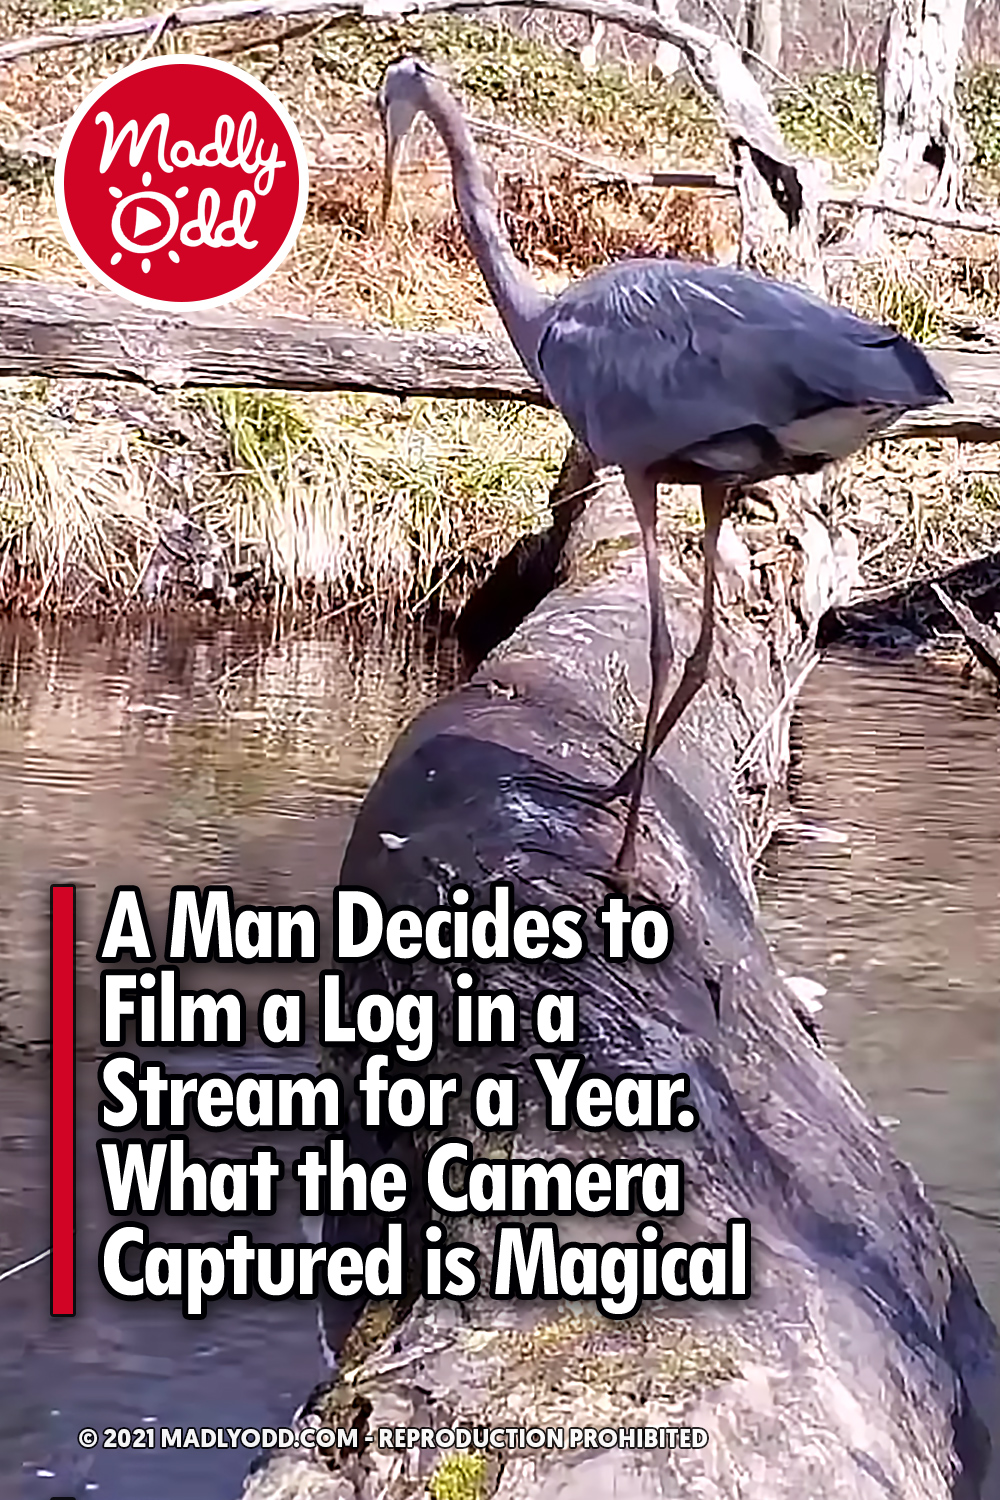 A Man Decides to Film a Log in a Stream for a Year. What the Camera Captured is Magical